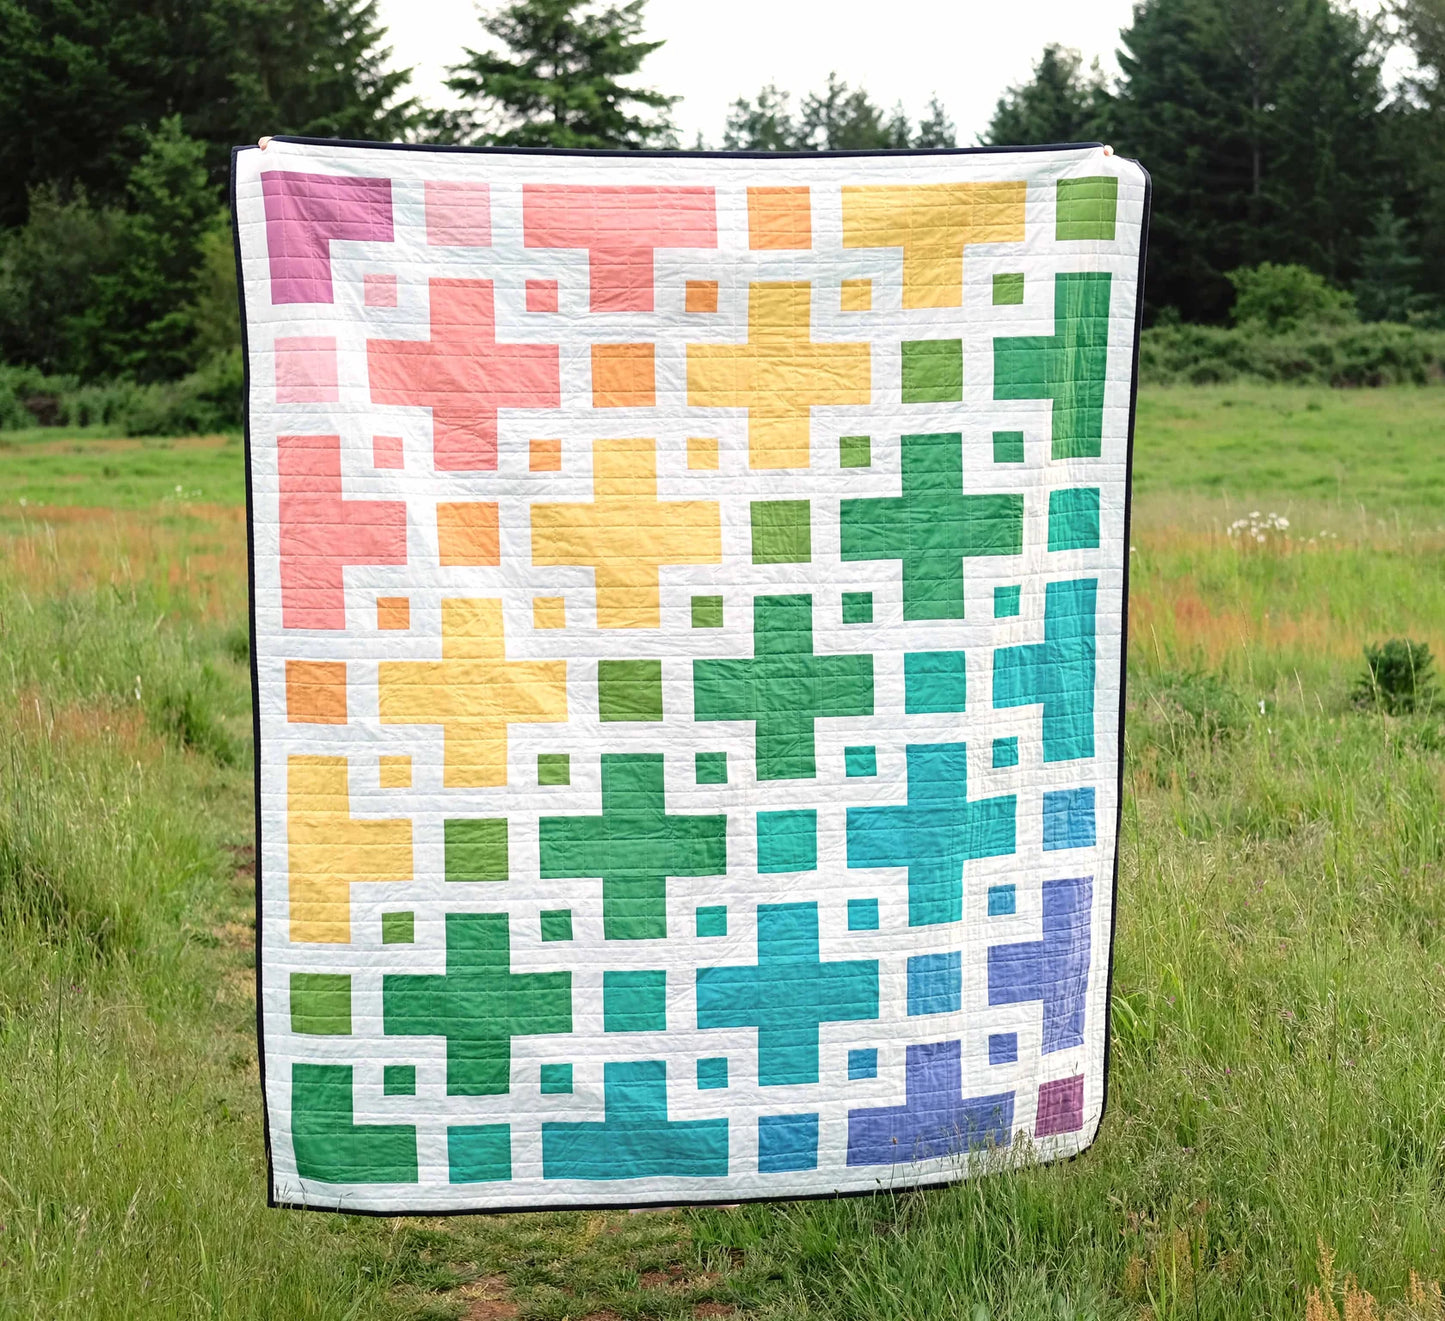 The Violet Quilt Pattern by Kitchen Table Quilting